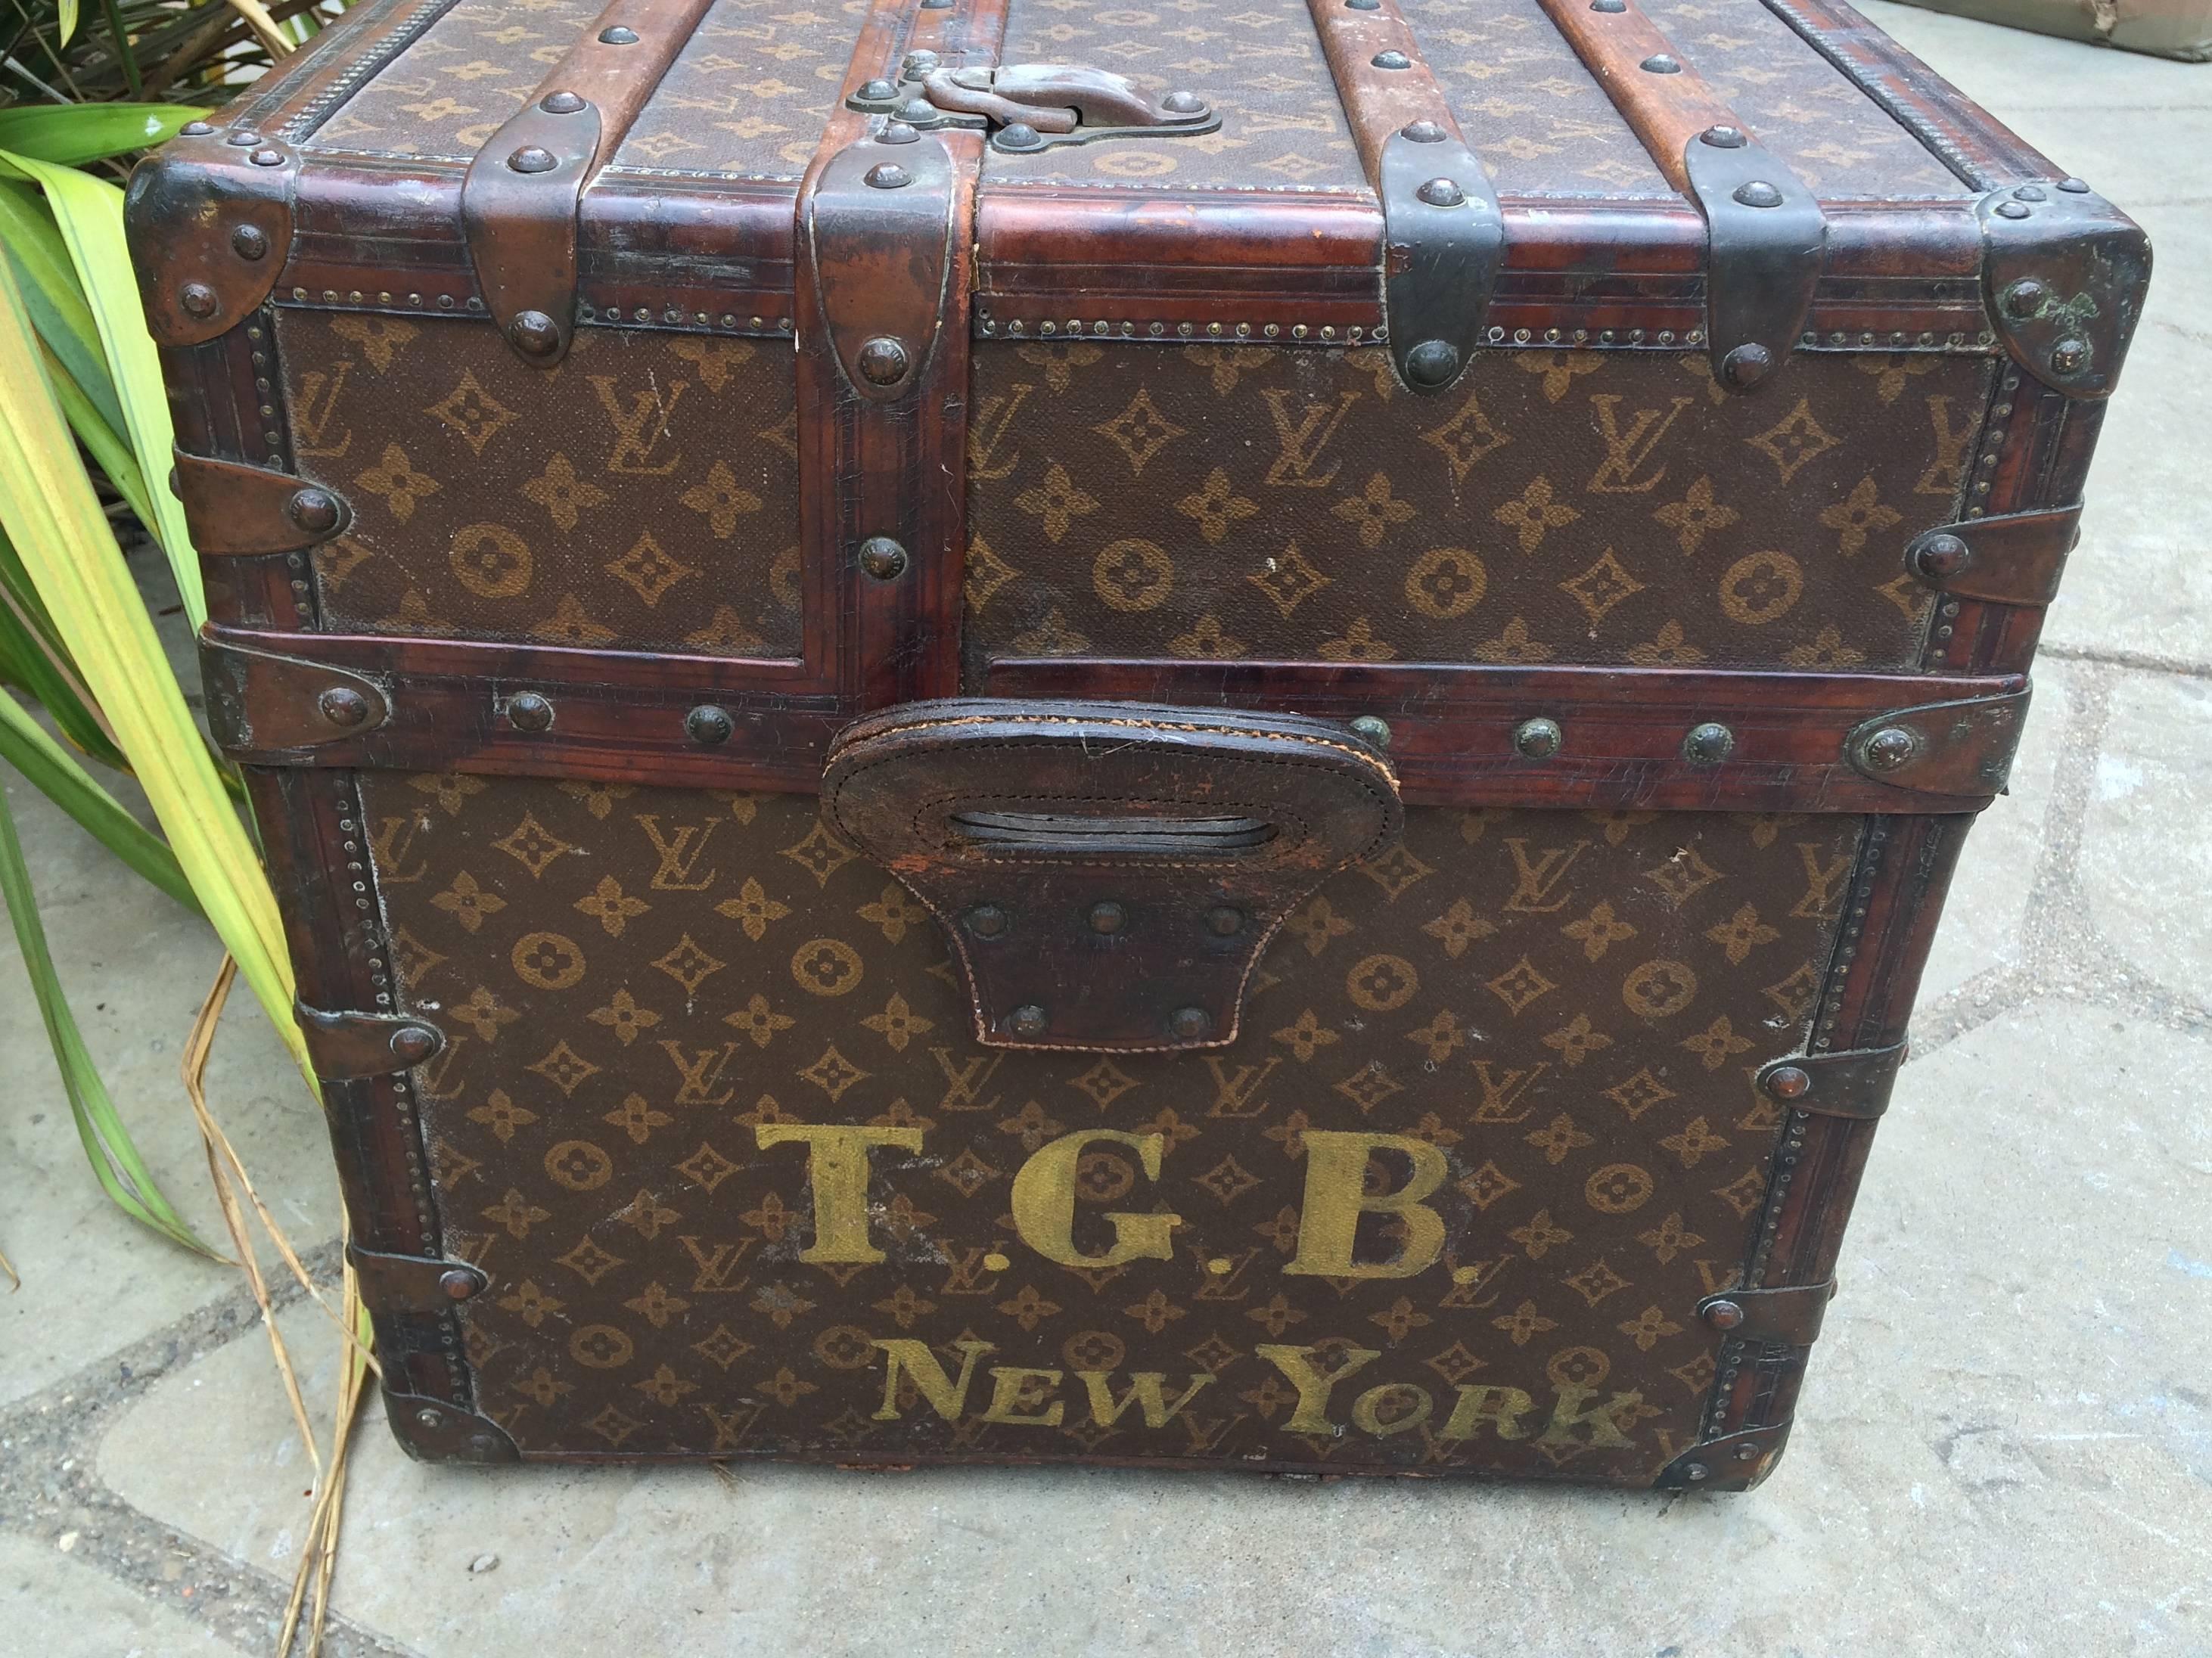 1920's Louis Vuitton Ideal Monogram Steamer Trunk  Goyard era Purse bag suitcase In Excellent Condition For Sale In Carmel-by-the-sea, CA